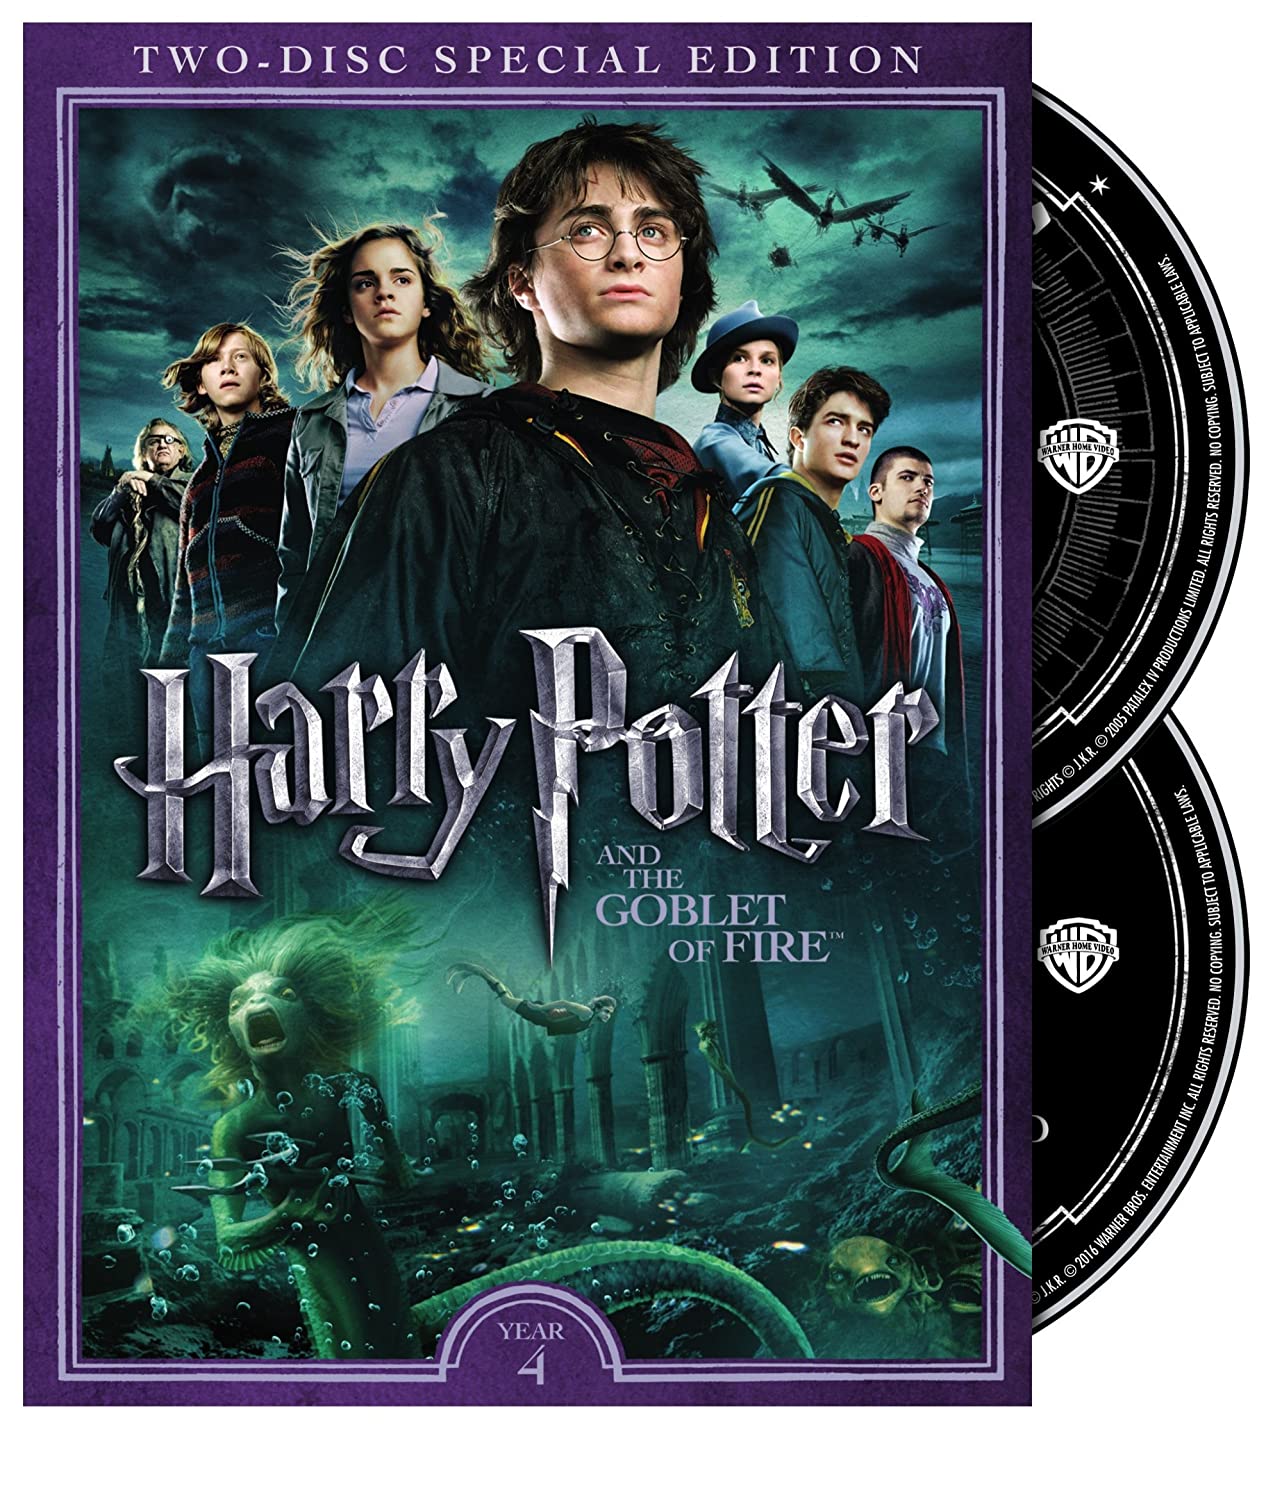 Harry Potter and the Sorcerer's Stone™ DVD (2-Disc Special Edition) (DVD)